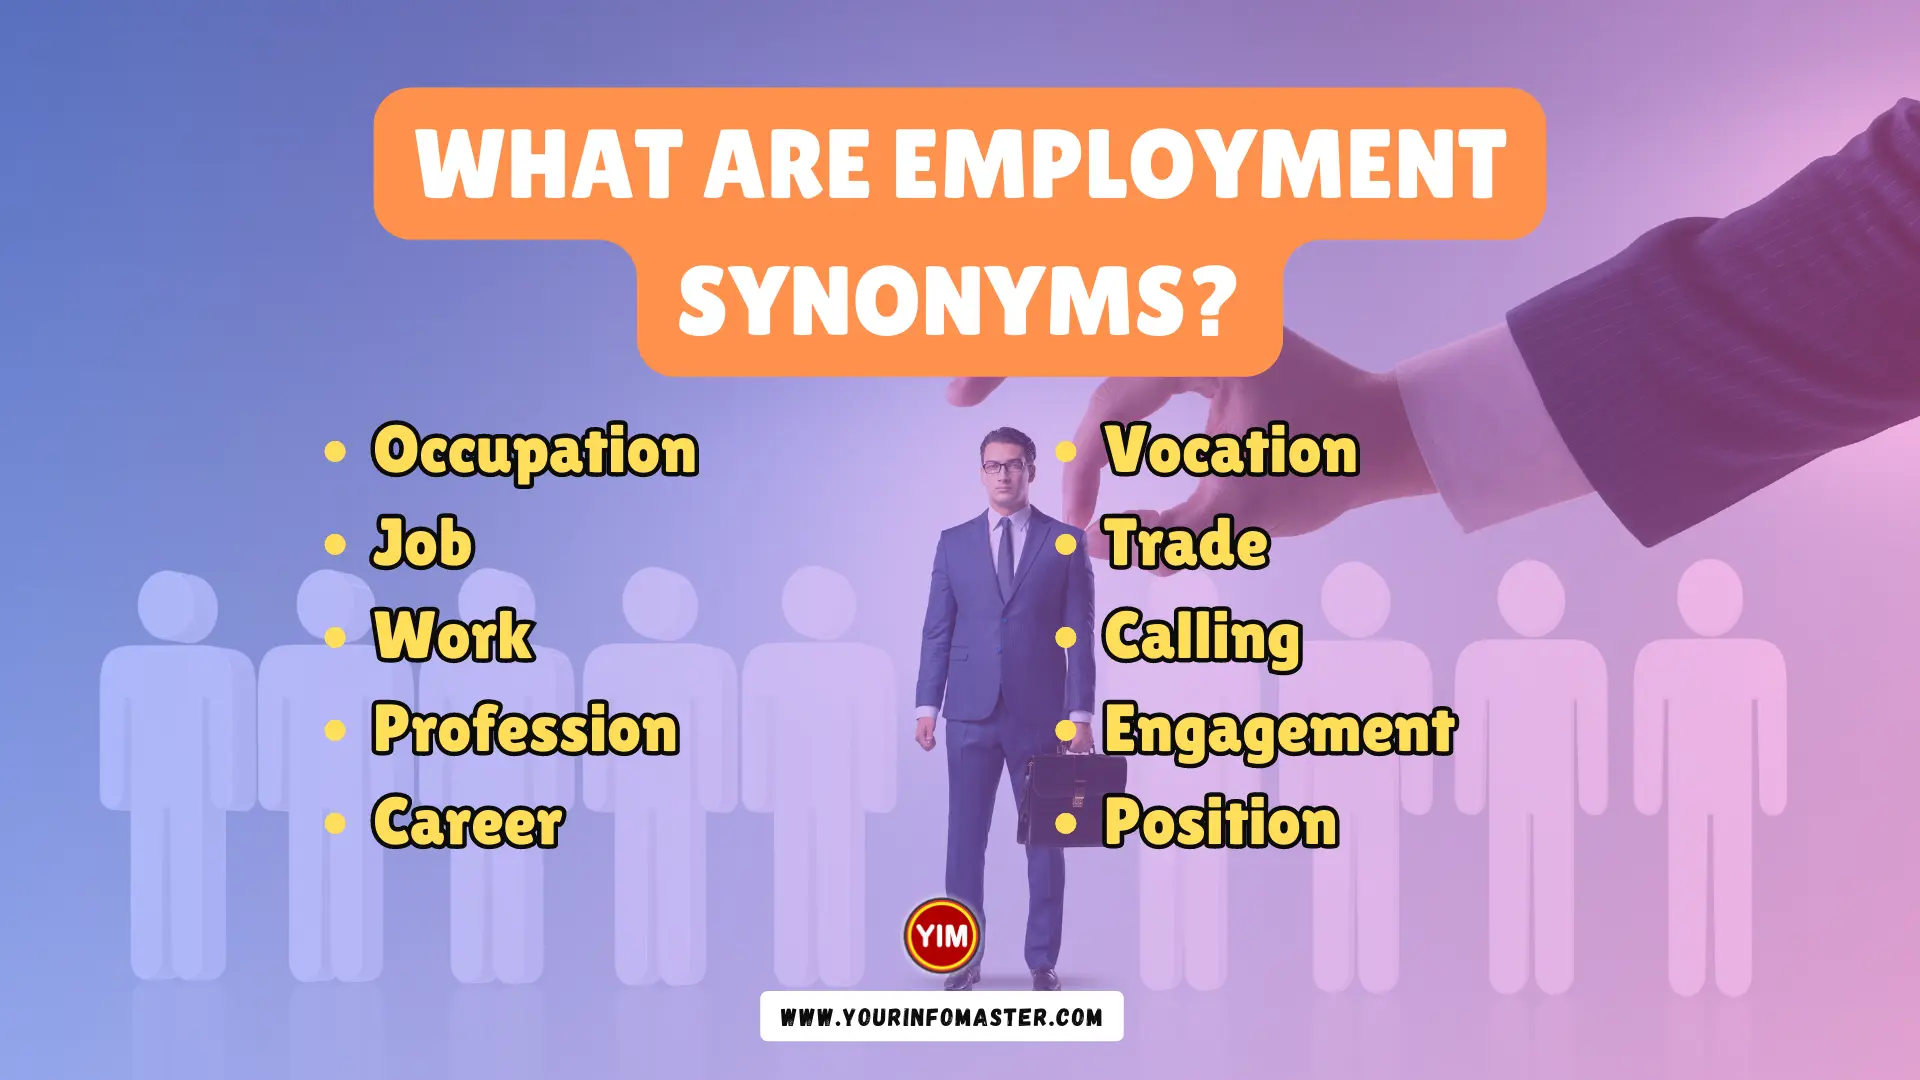 What are Employment Synonyms